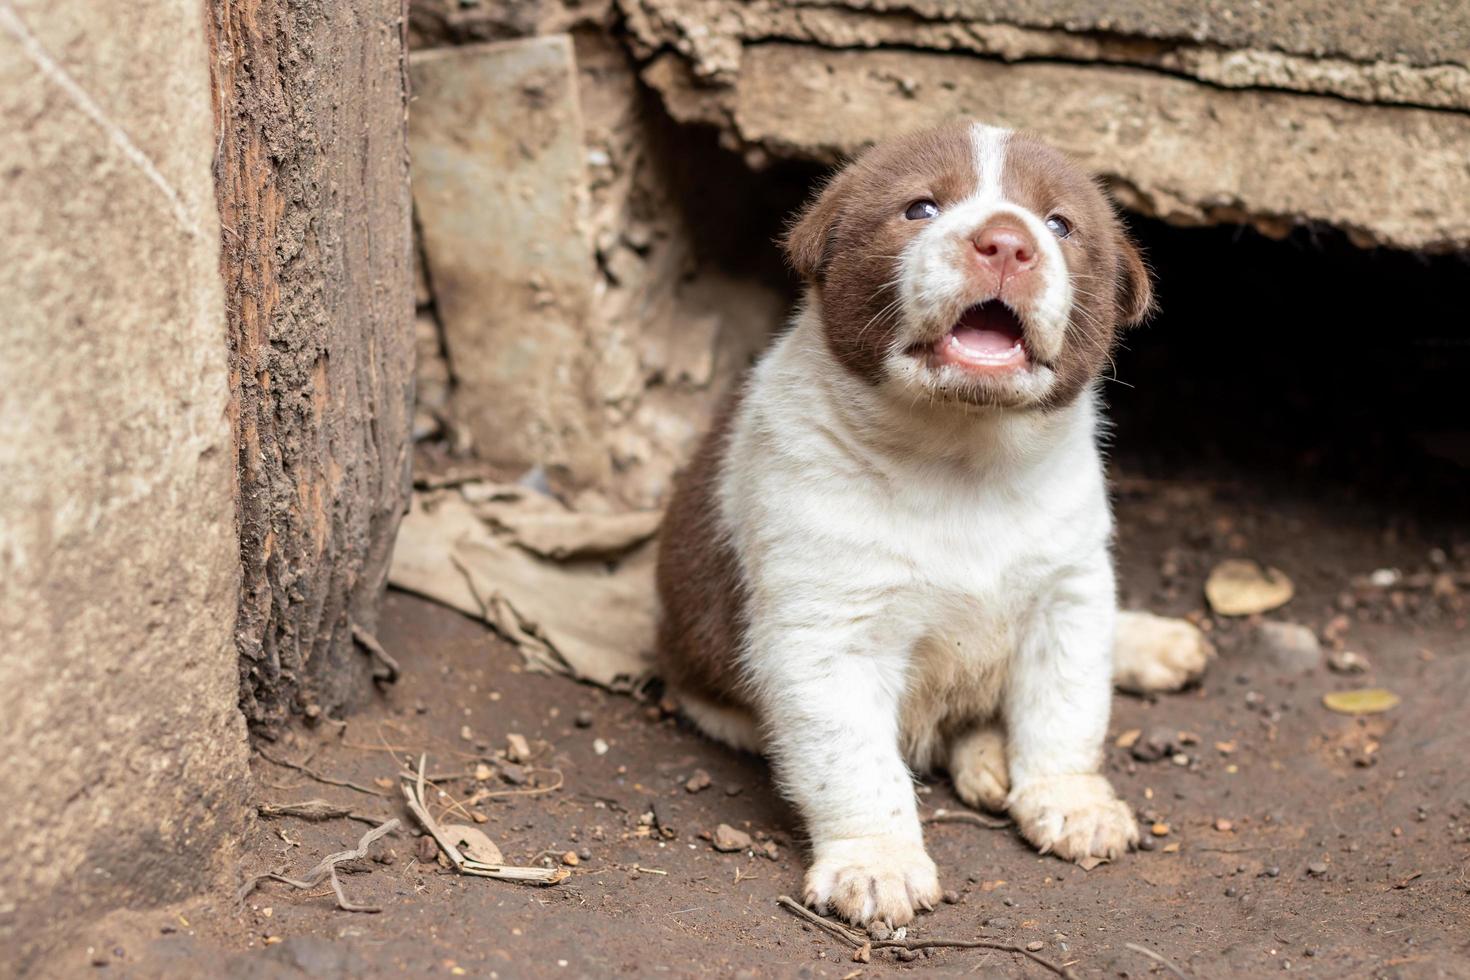 The white and brown Thai puppy lives in a burrow of concrete. photo